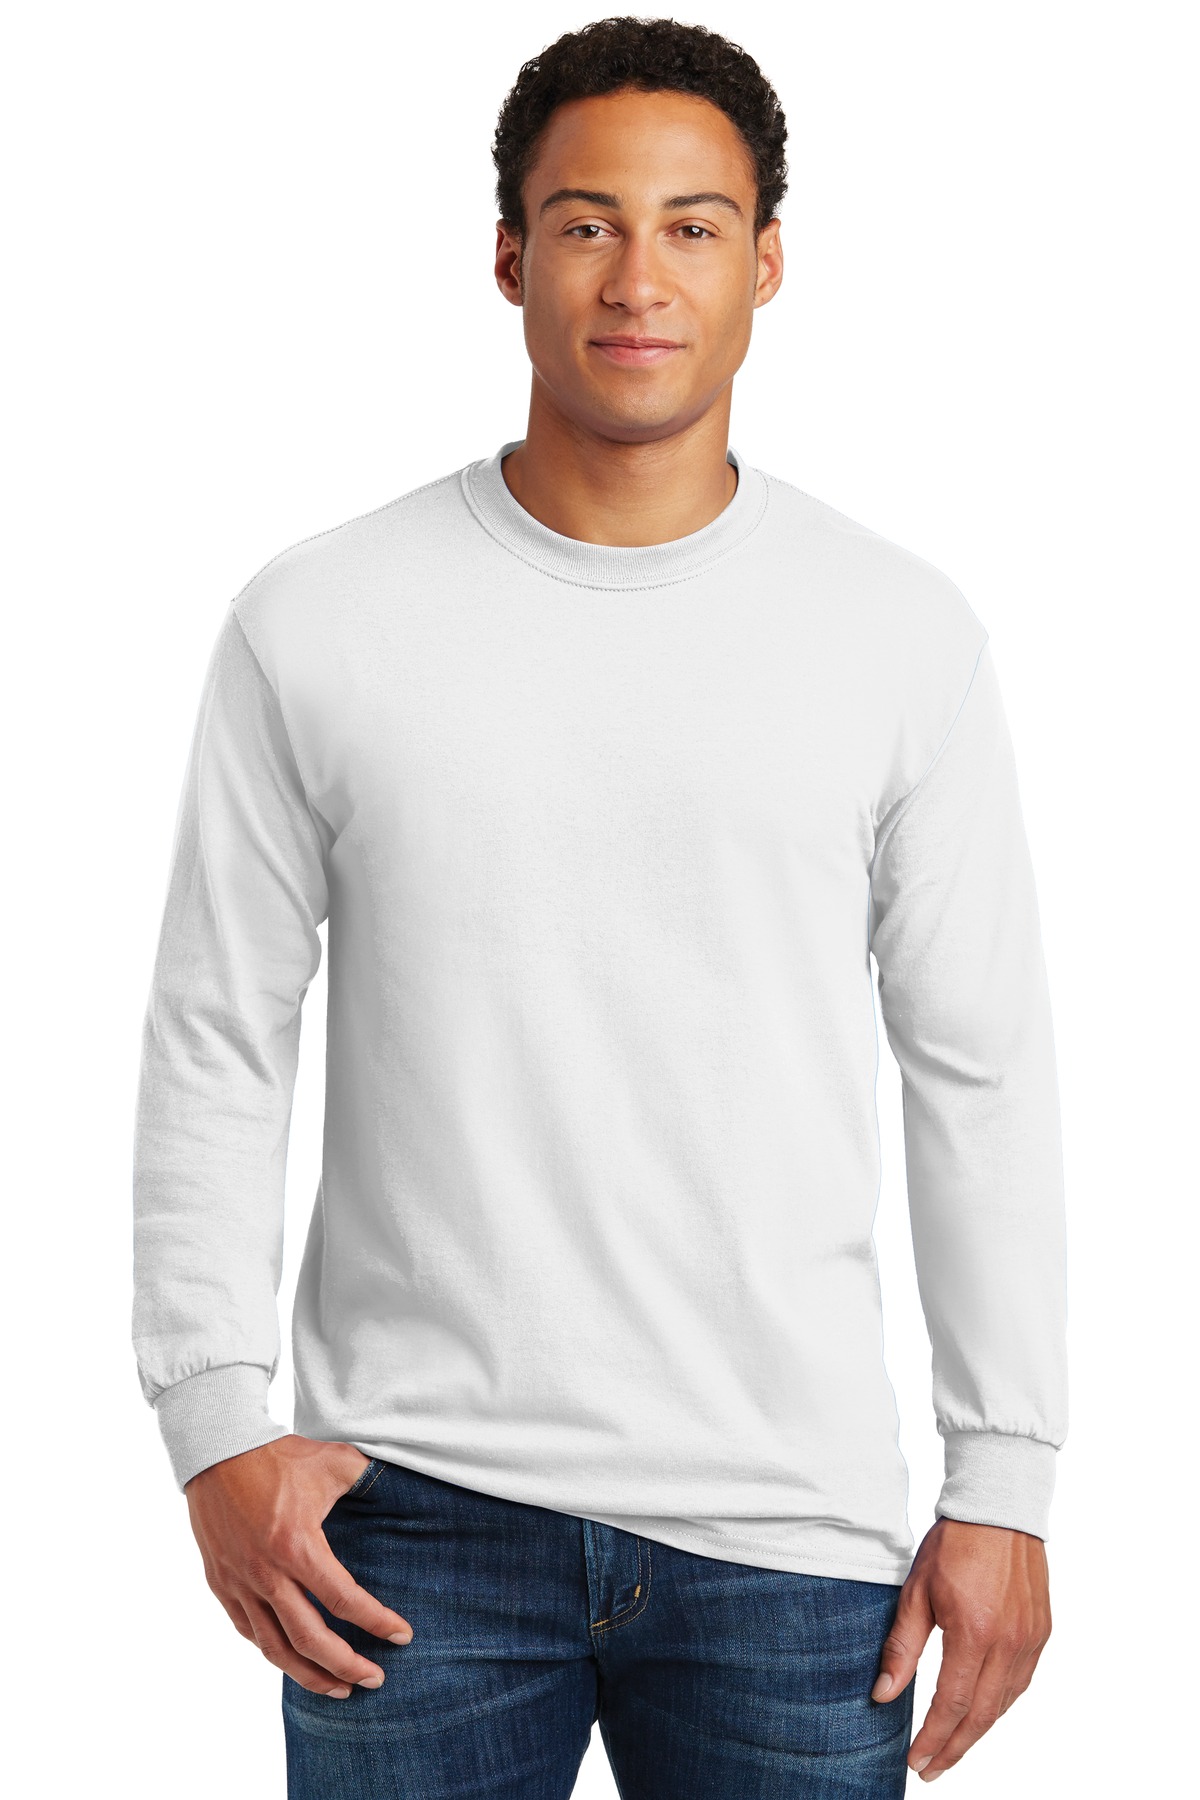 White Long Sleeve T Adult